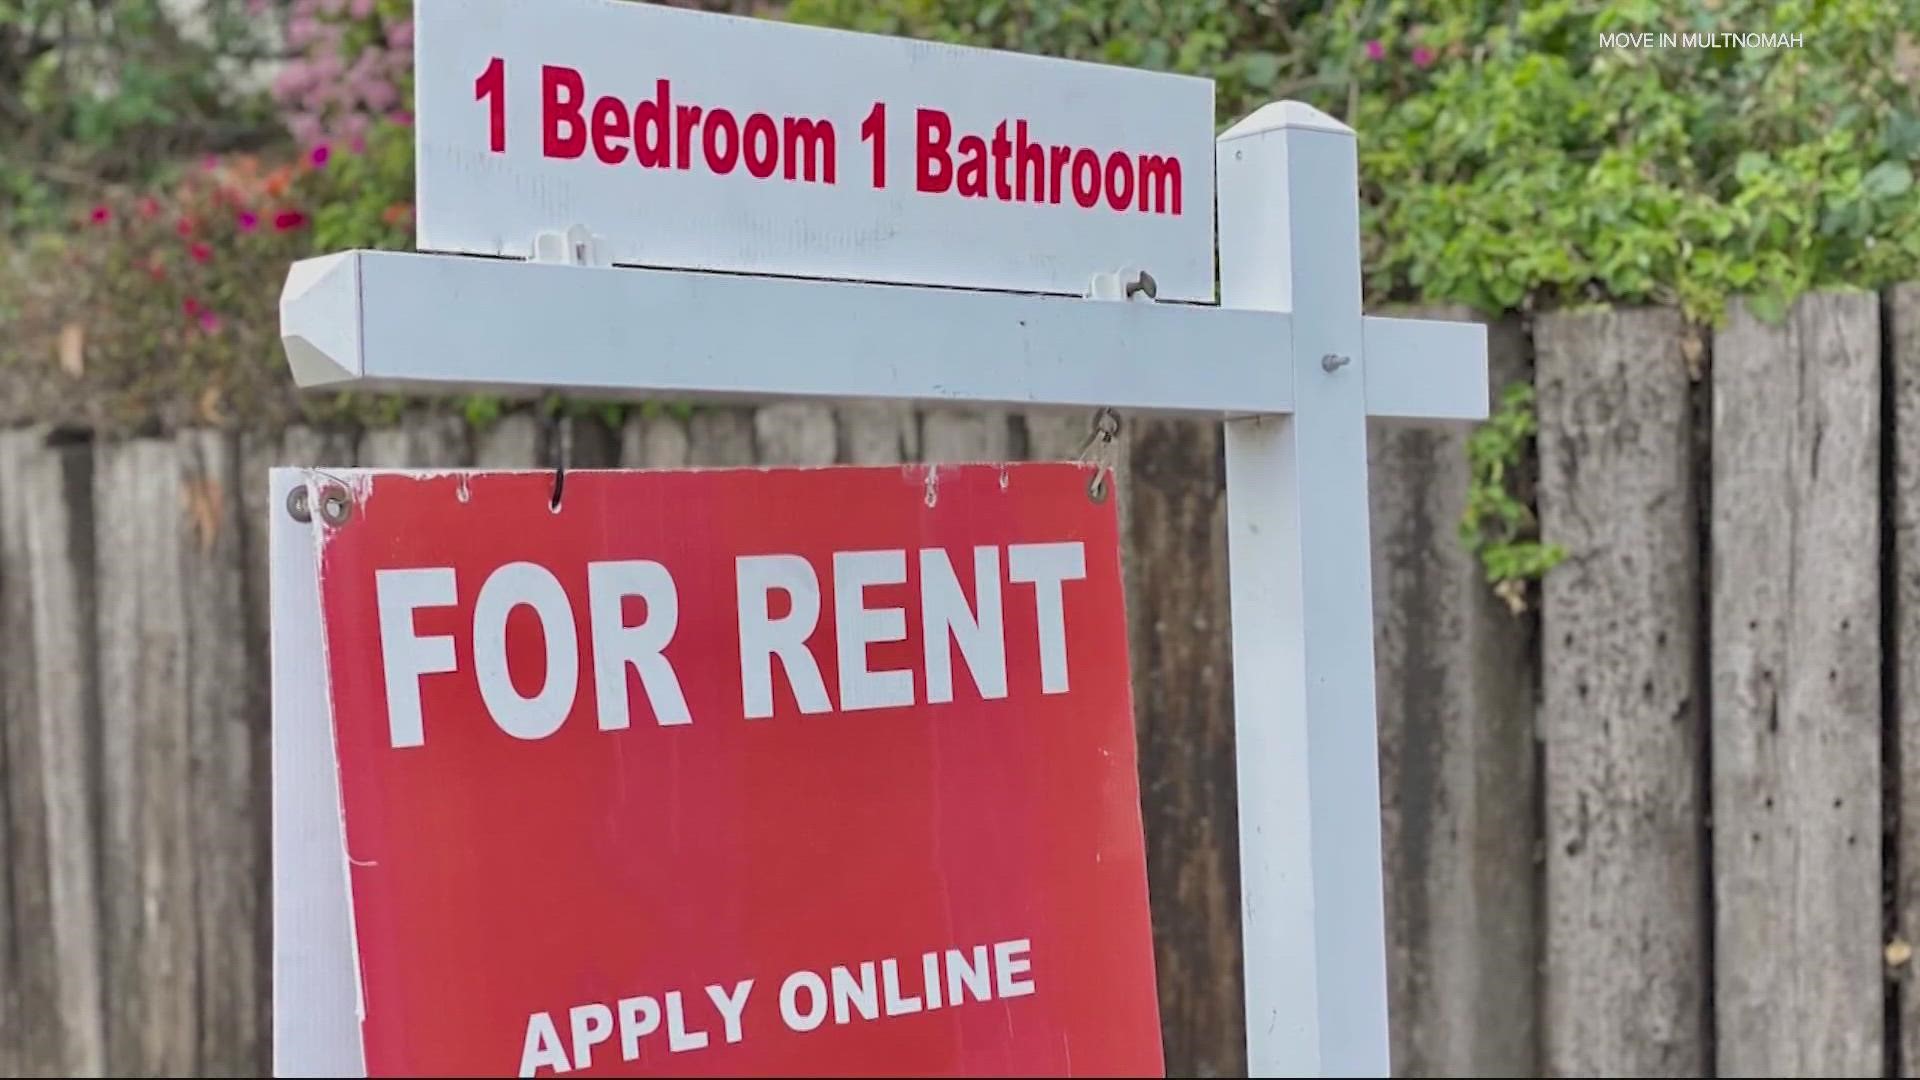 "Move in Multnomah" would pay market rate rent and cover the security deposit and any damages. Landlords say in the past, it has been a great partnership.